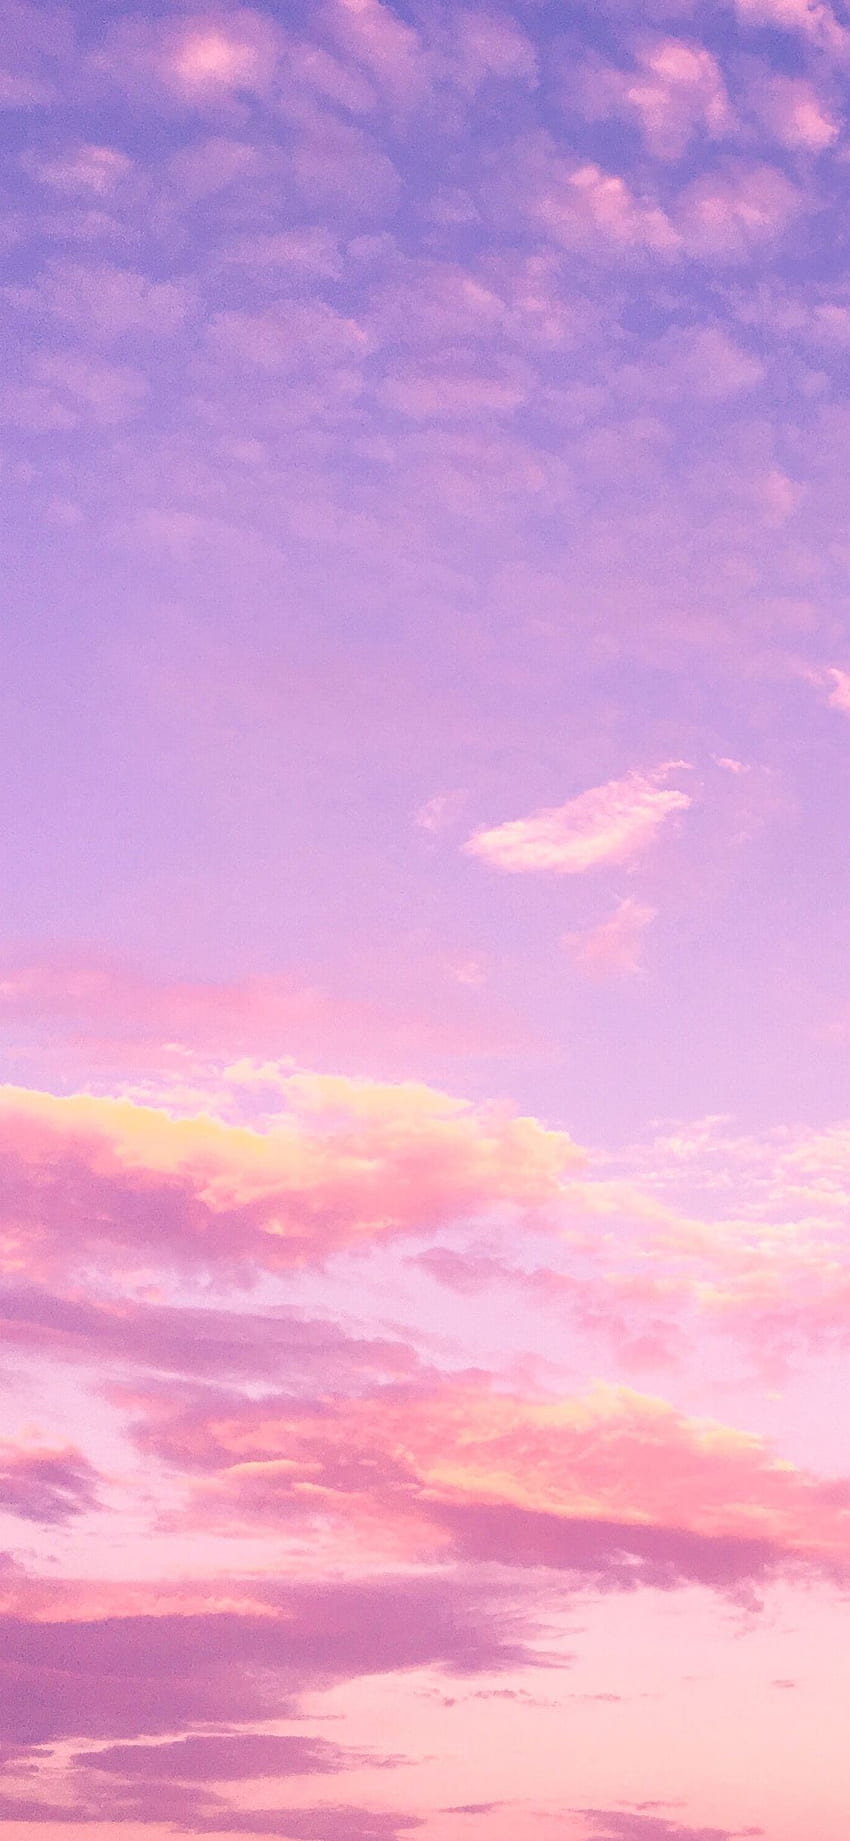 Download wallpaper 938x1668 clouds sky purple thick dark iphone  876s6 for parallax hd background